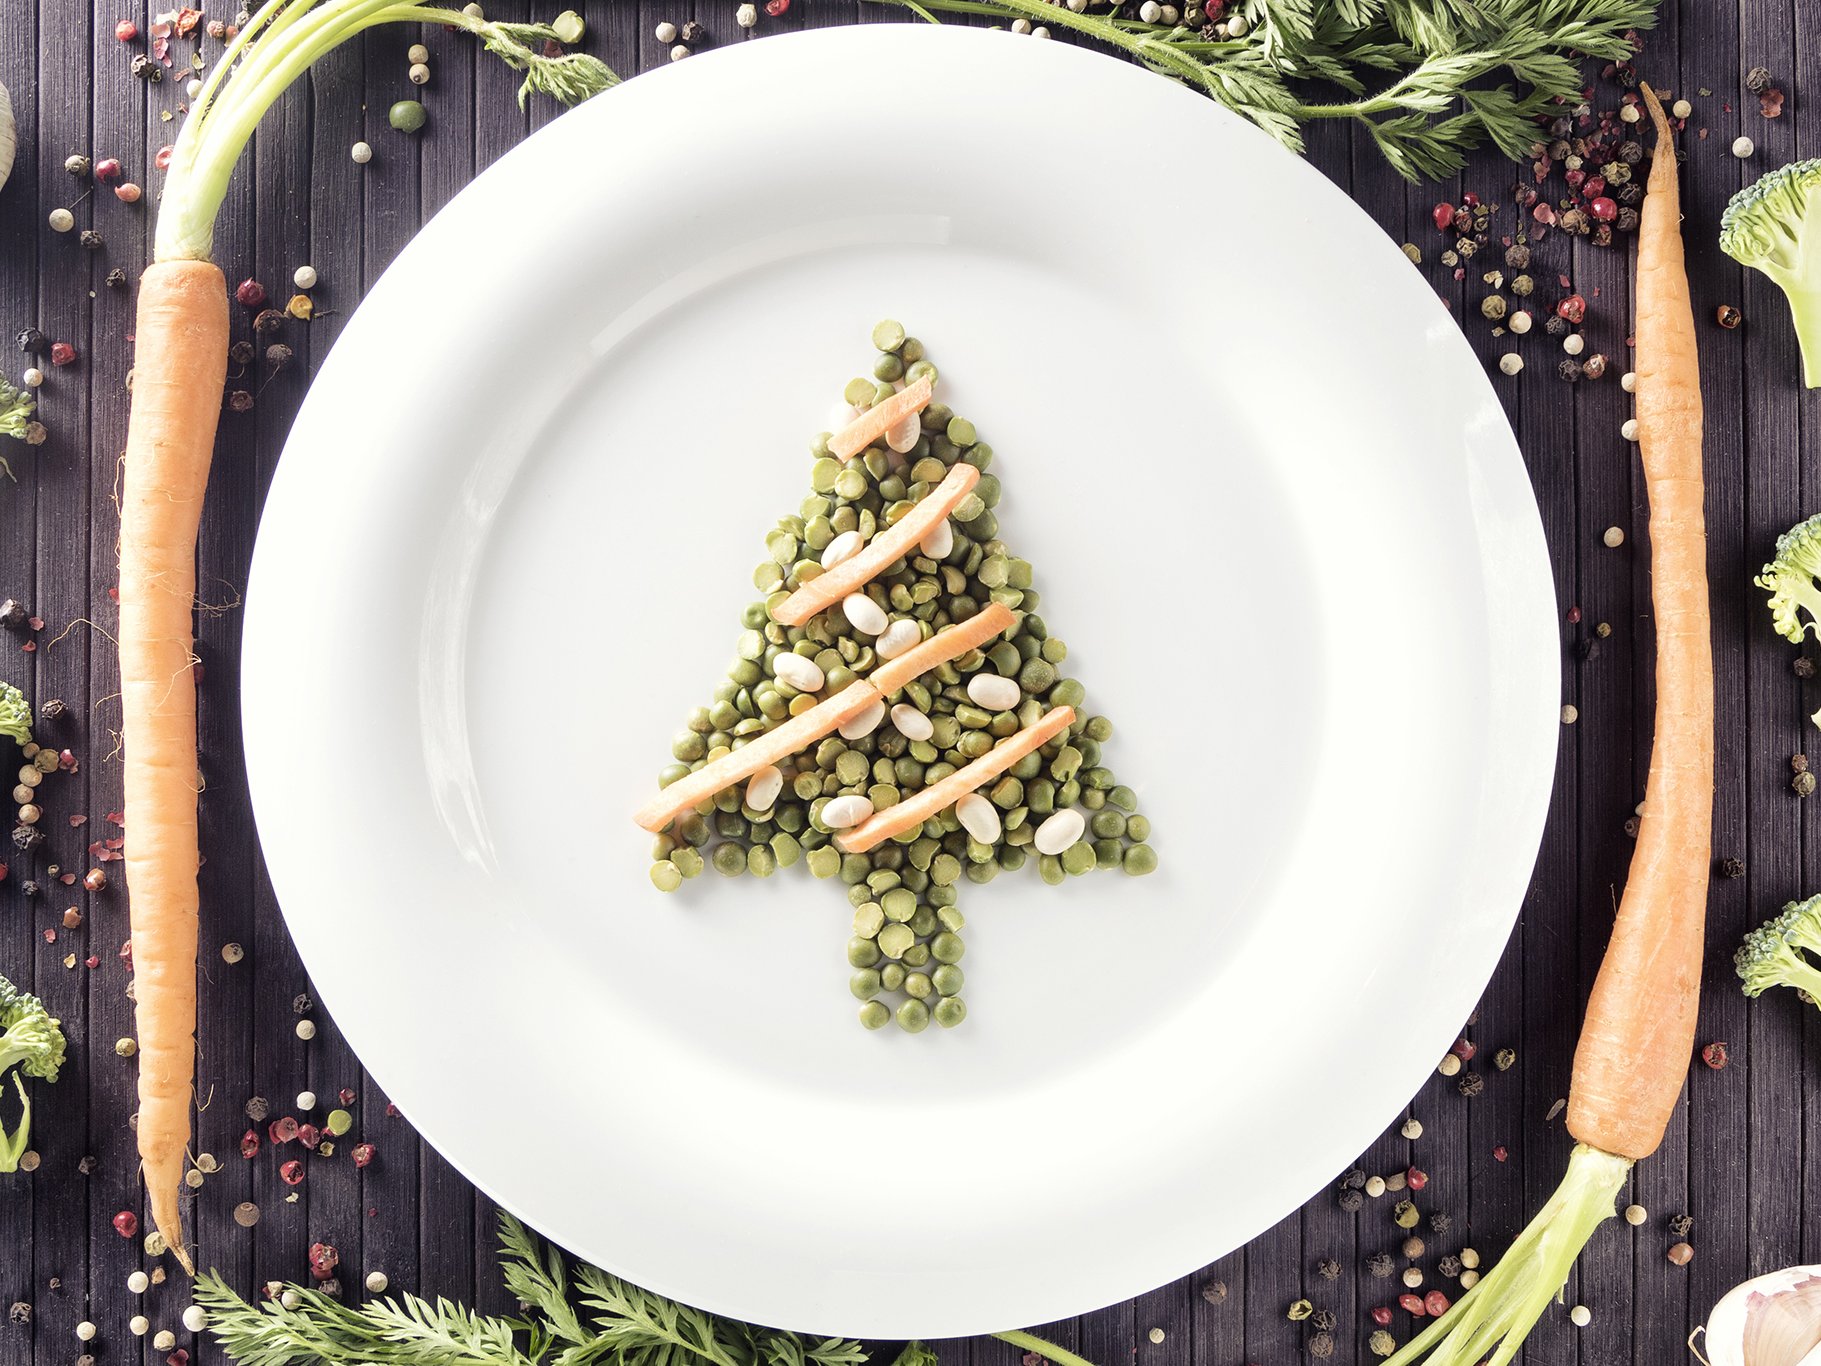 More shoppers are planning a plant-based centrepiece for their Christmas table.